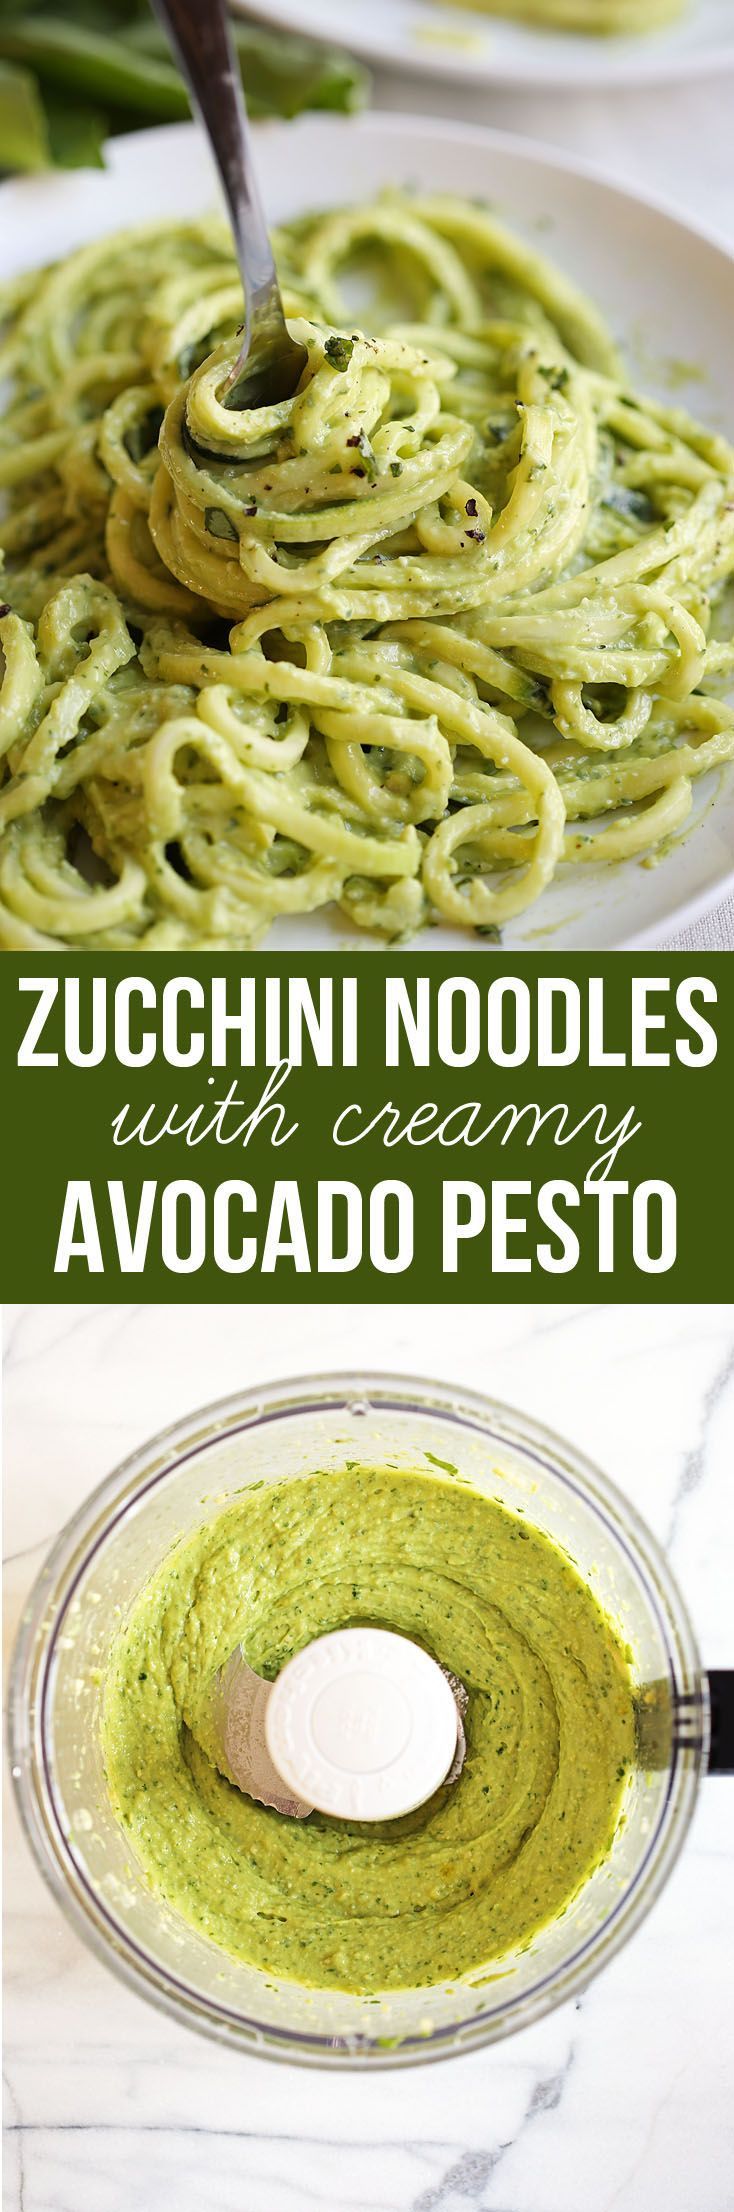 Save this zoodles recipe for zucchini noodles with creamy avocado pesto for a healthy weeknight dish you can pair with chicken,